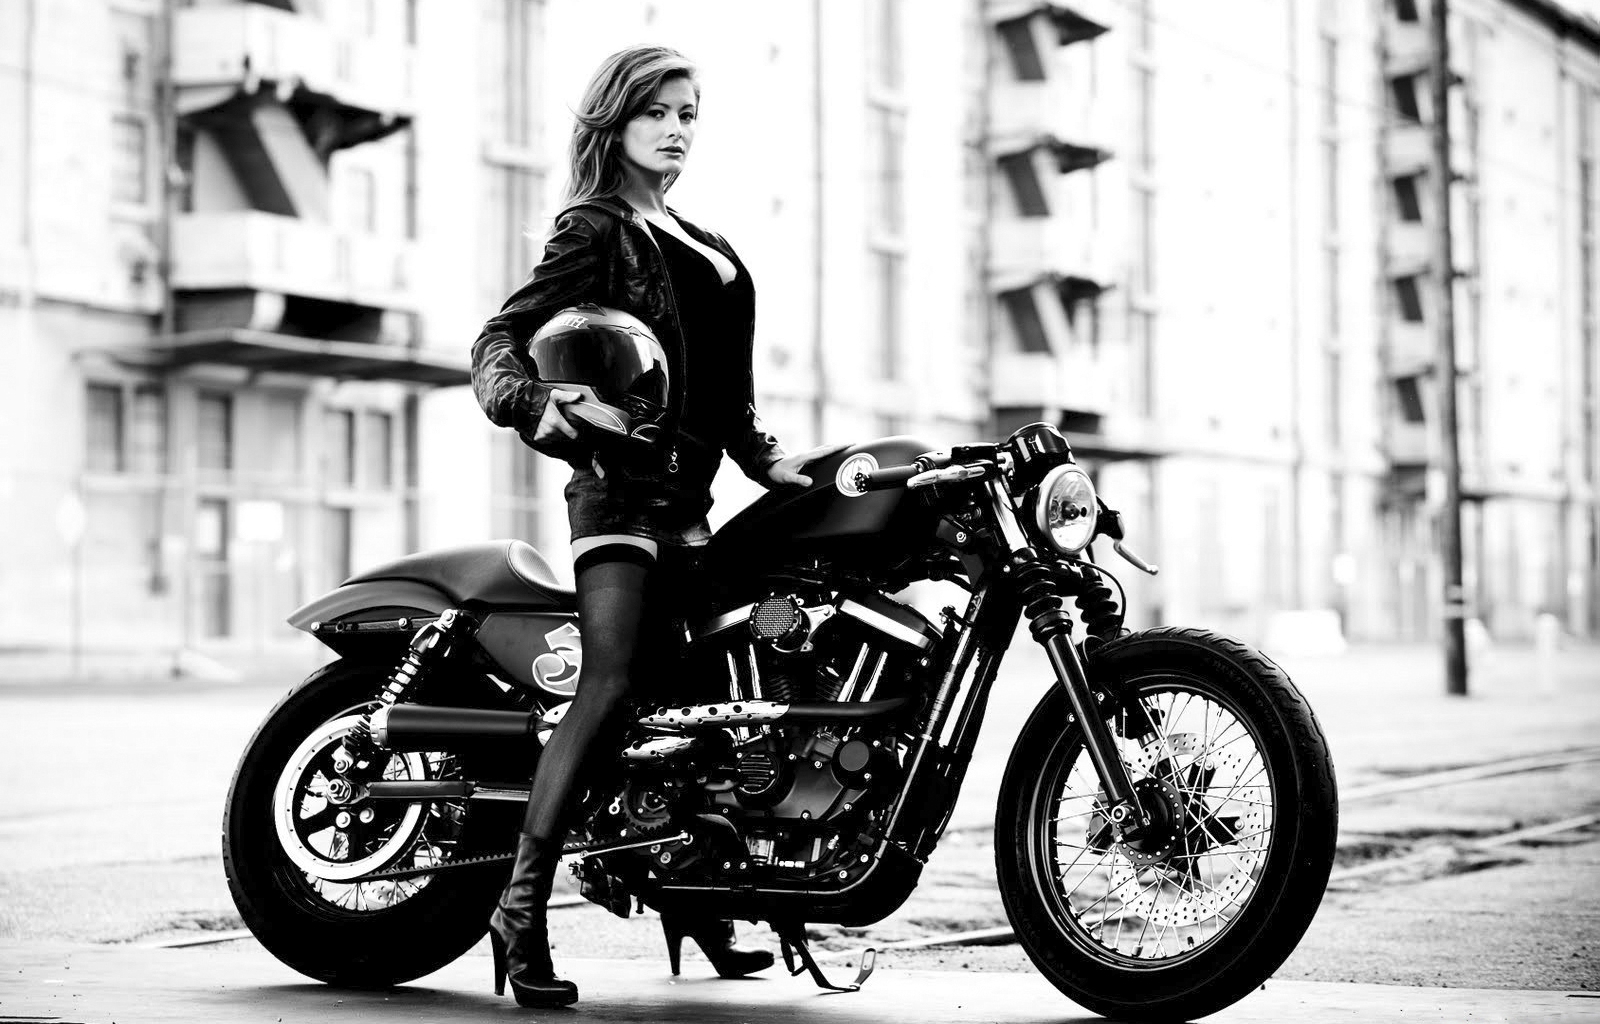 girls, people, transport, motorcycles High Definition image